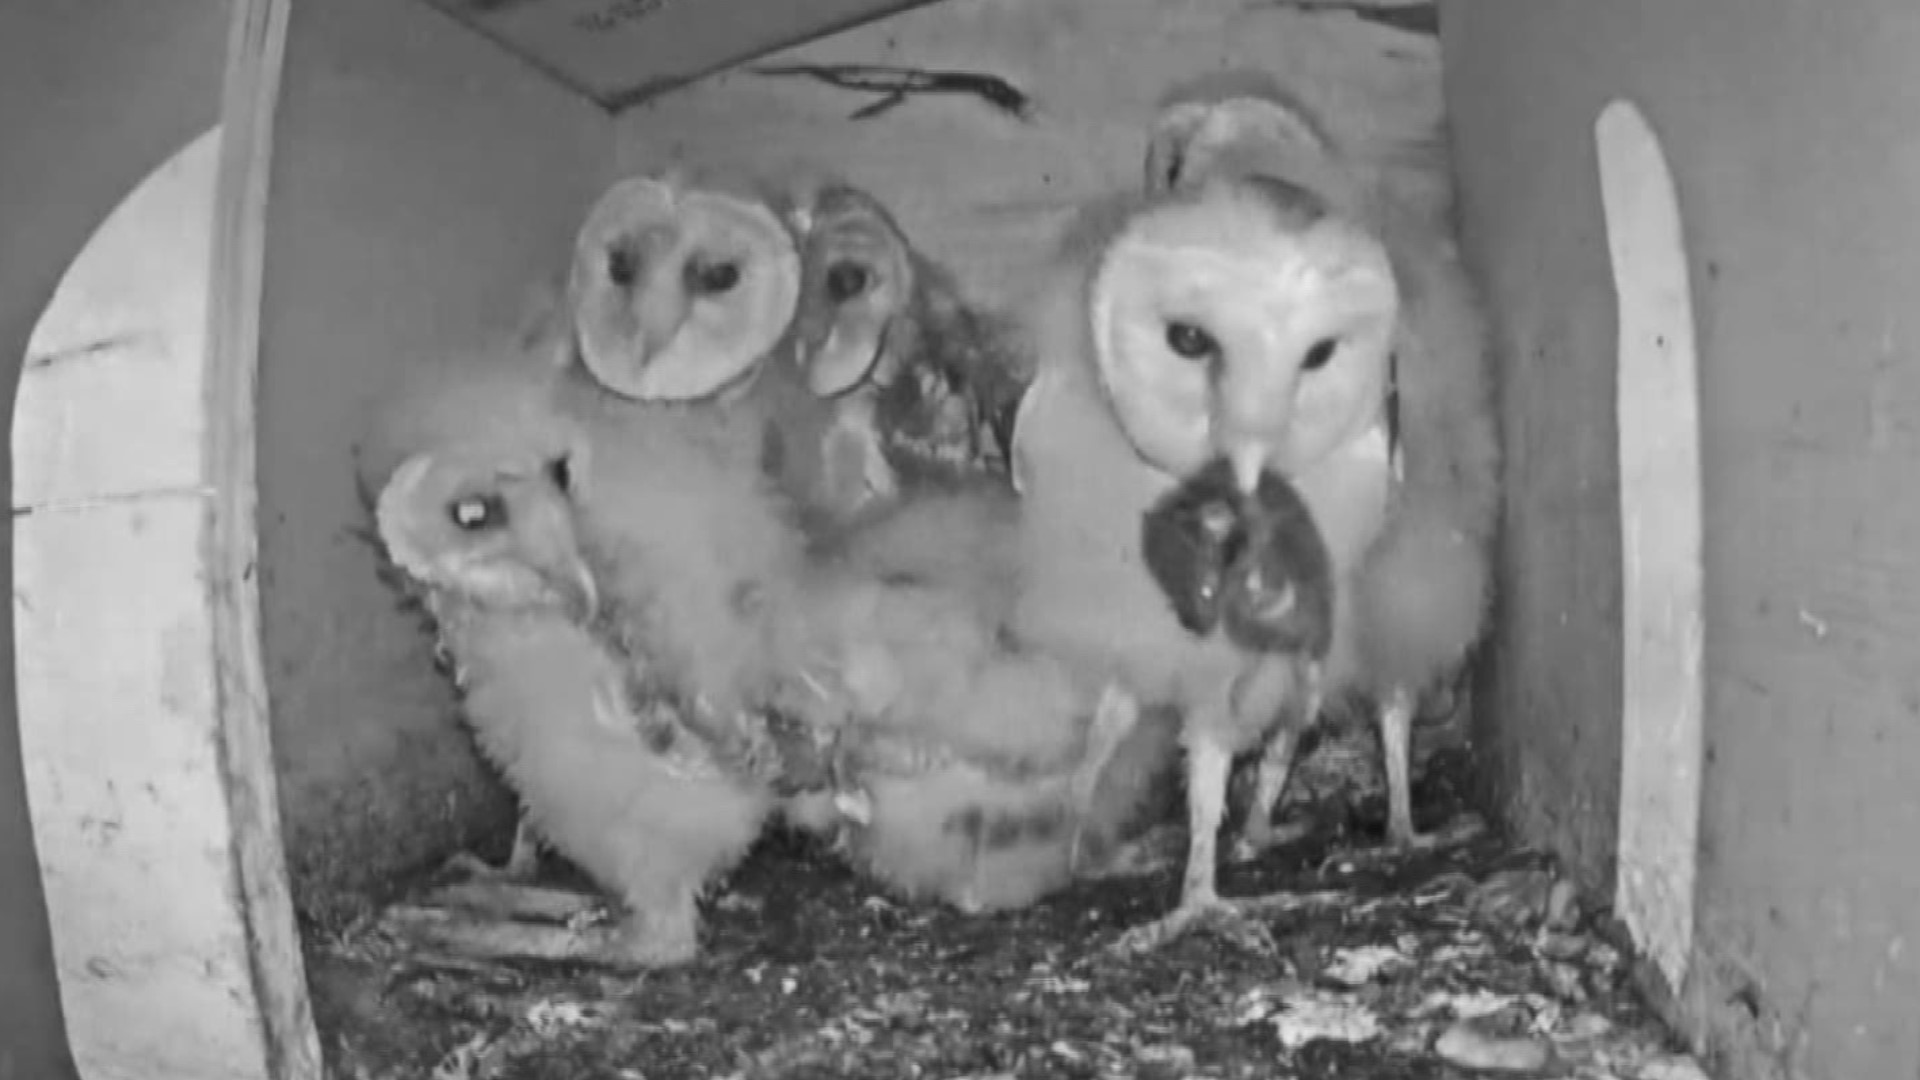 "We'll see every single step out. We'll see them fly. We'll see everything," said Stacey Mae Rudge, whose family hosts a barn owl box on their property.